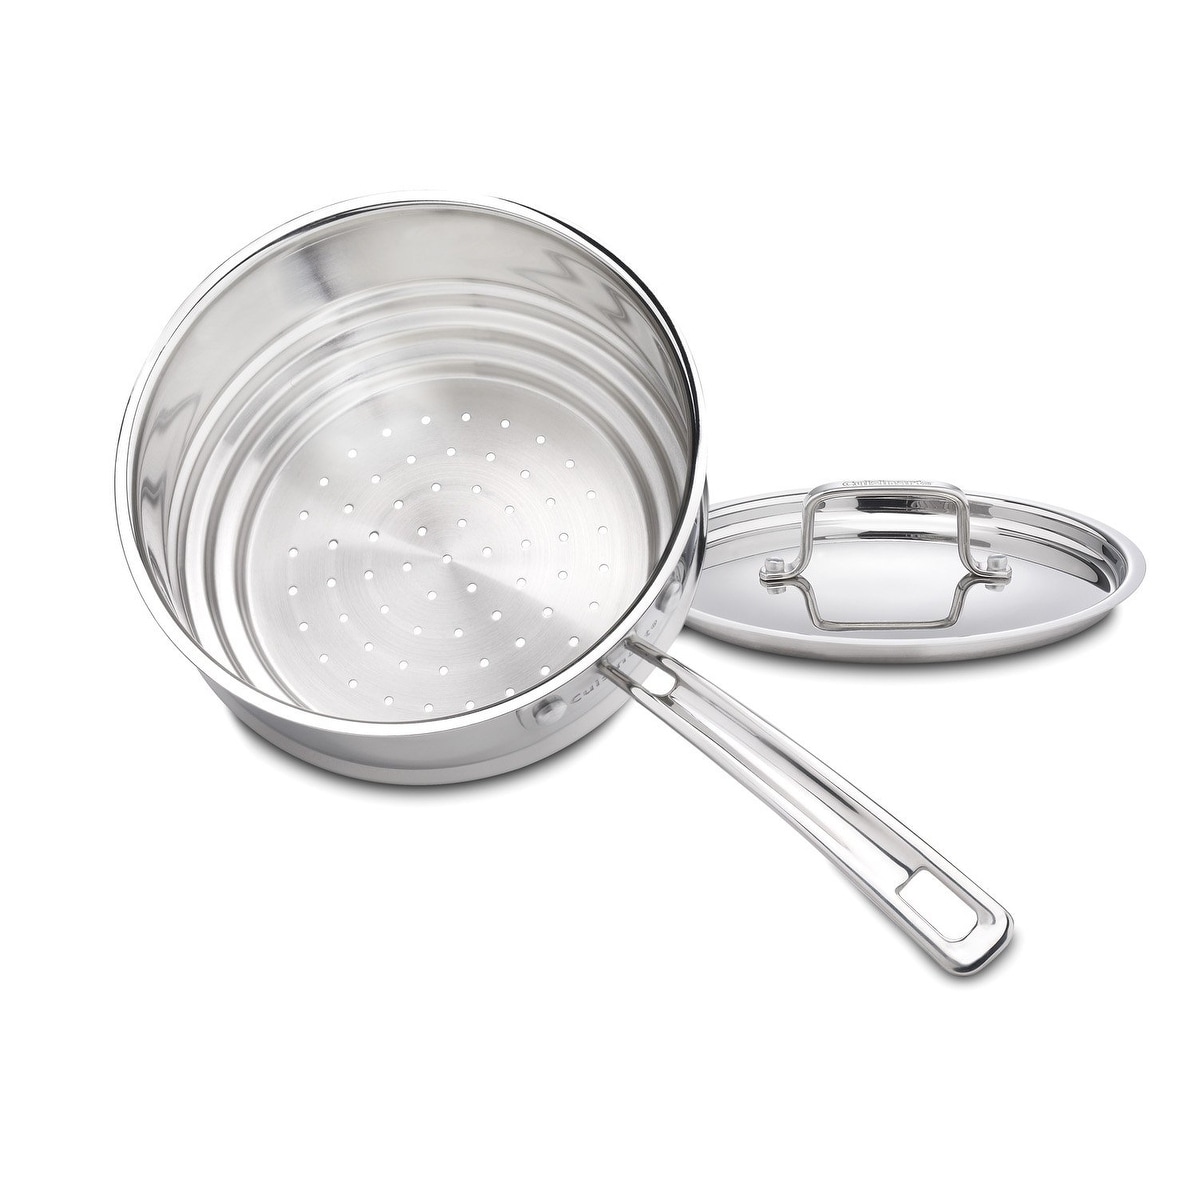 https://ak1.ostkcdn.com/images/products/is/images/direct/78fe79ba2ae548c10cbaf88cdc77afc25ce44b87/Cuisinart-MCP116-20N-MultiClad-Pro-Stainless-20cm-Universal-Steamer-with-Cover.jpg